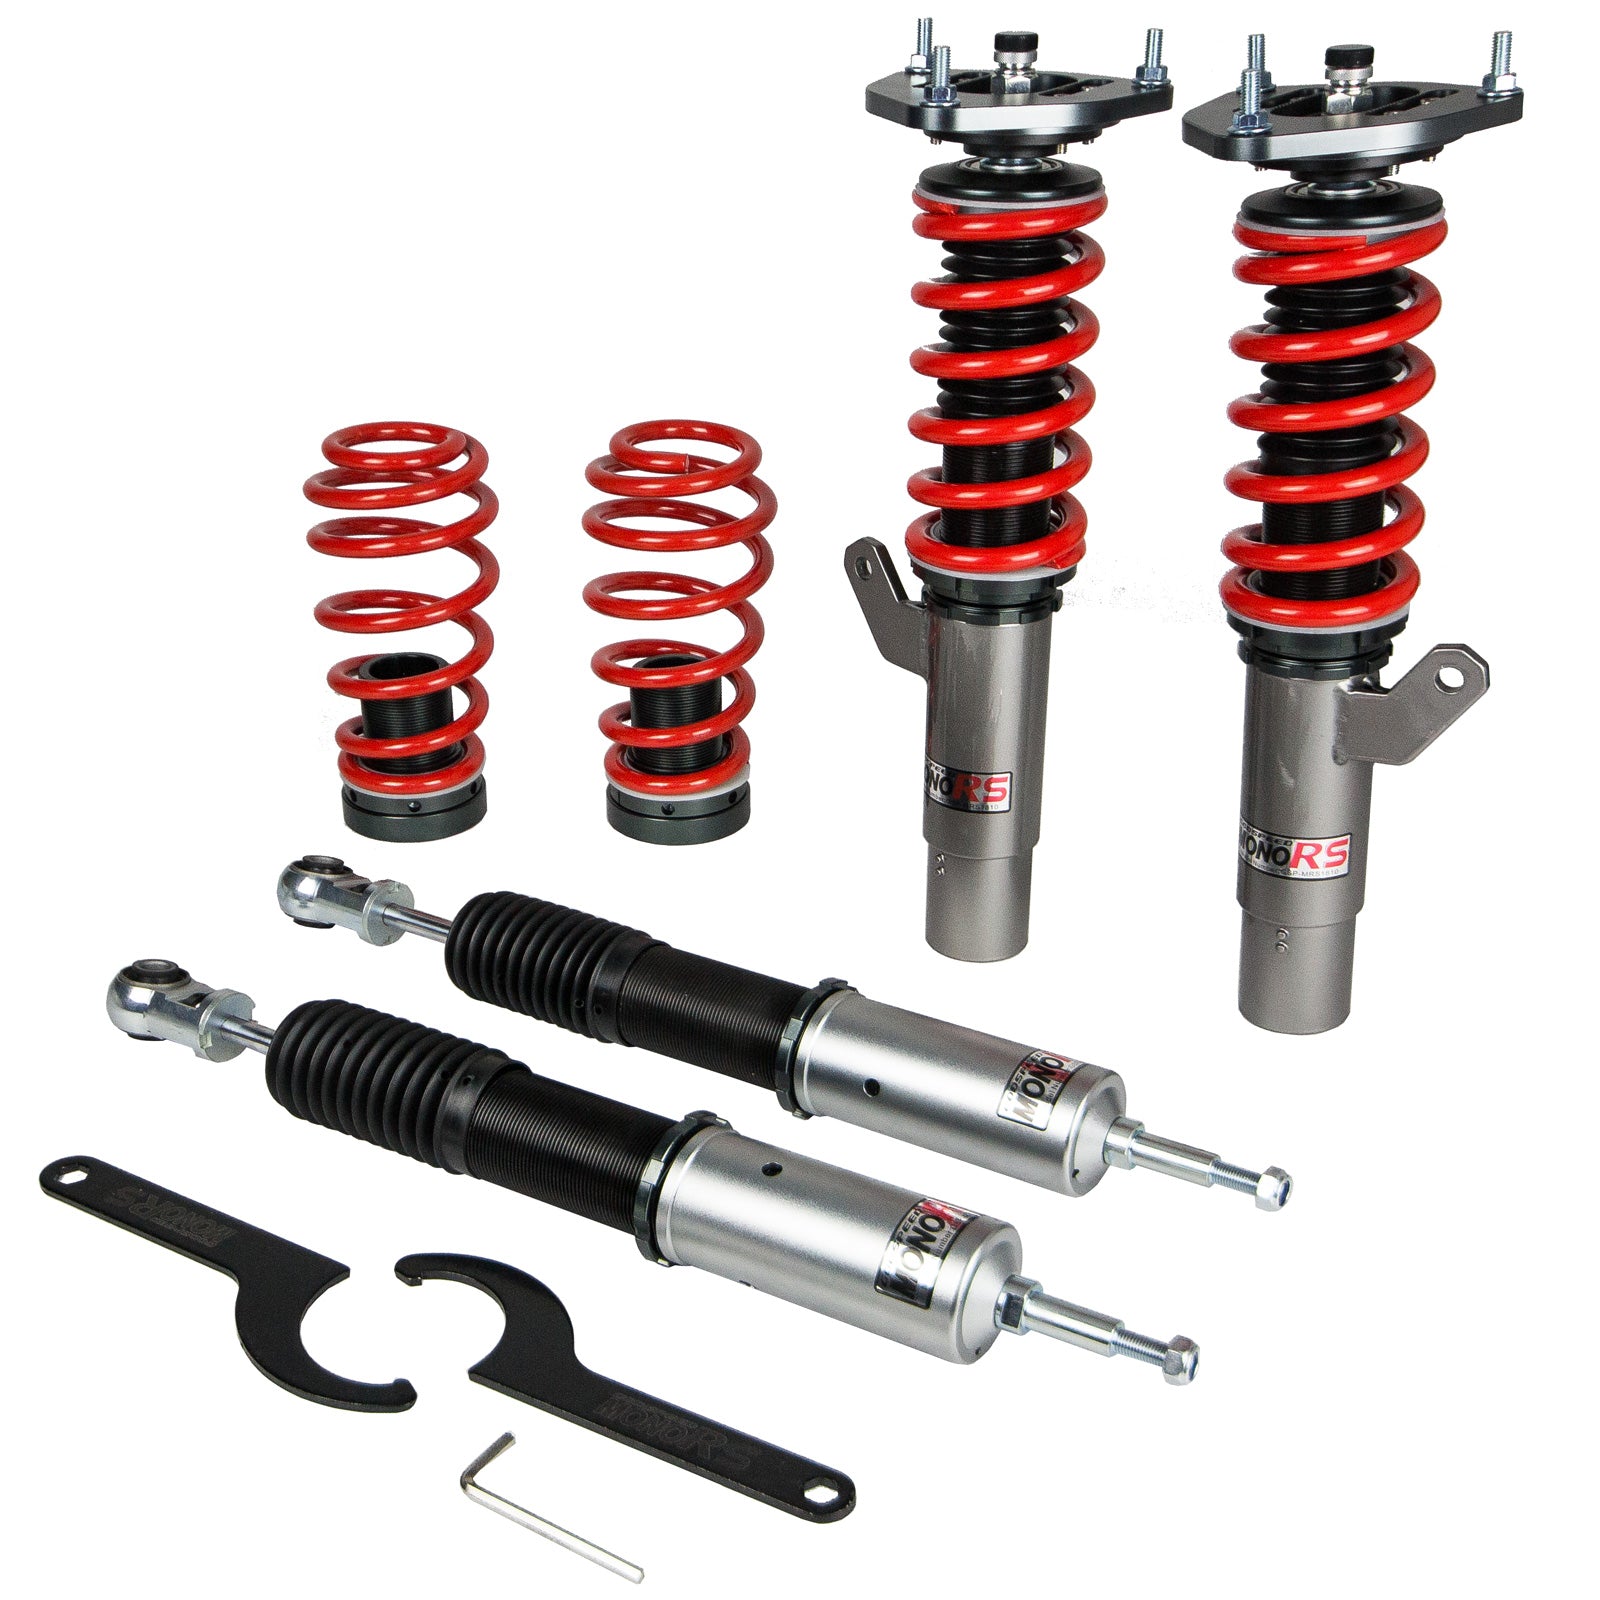 Godspeed MRS1810-A MonoRS Coilover Lowering Kit, 32 Damping Adjustment, Ride Height Adjustable